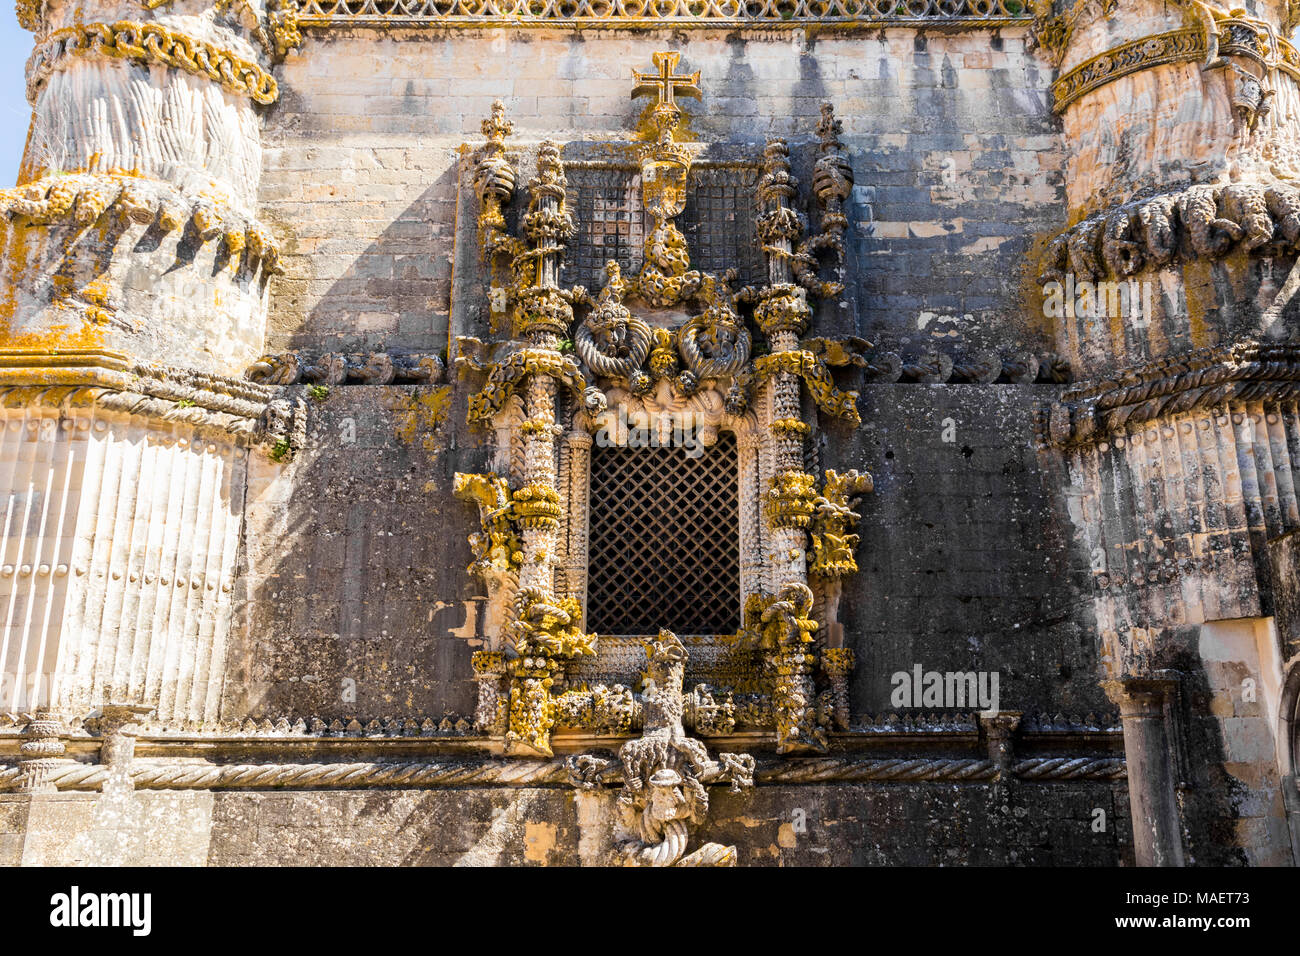 The famous chapterhouse window of the Convent of Christ in Tomar, Portugal, a well-known example of Manueline style. A World Heritage Site since 1983 Stock Photo